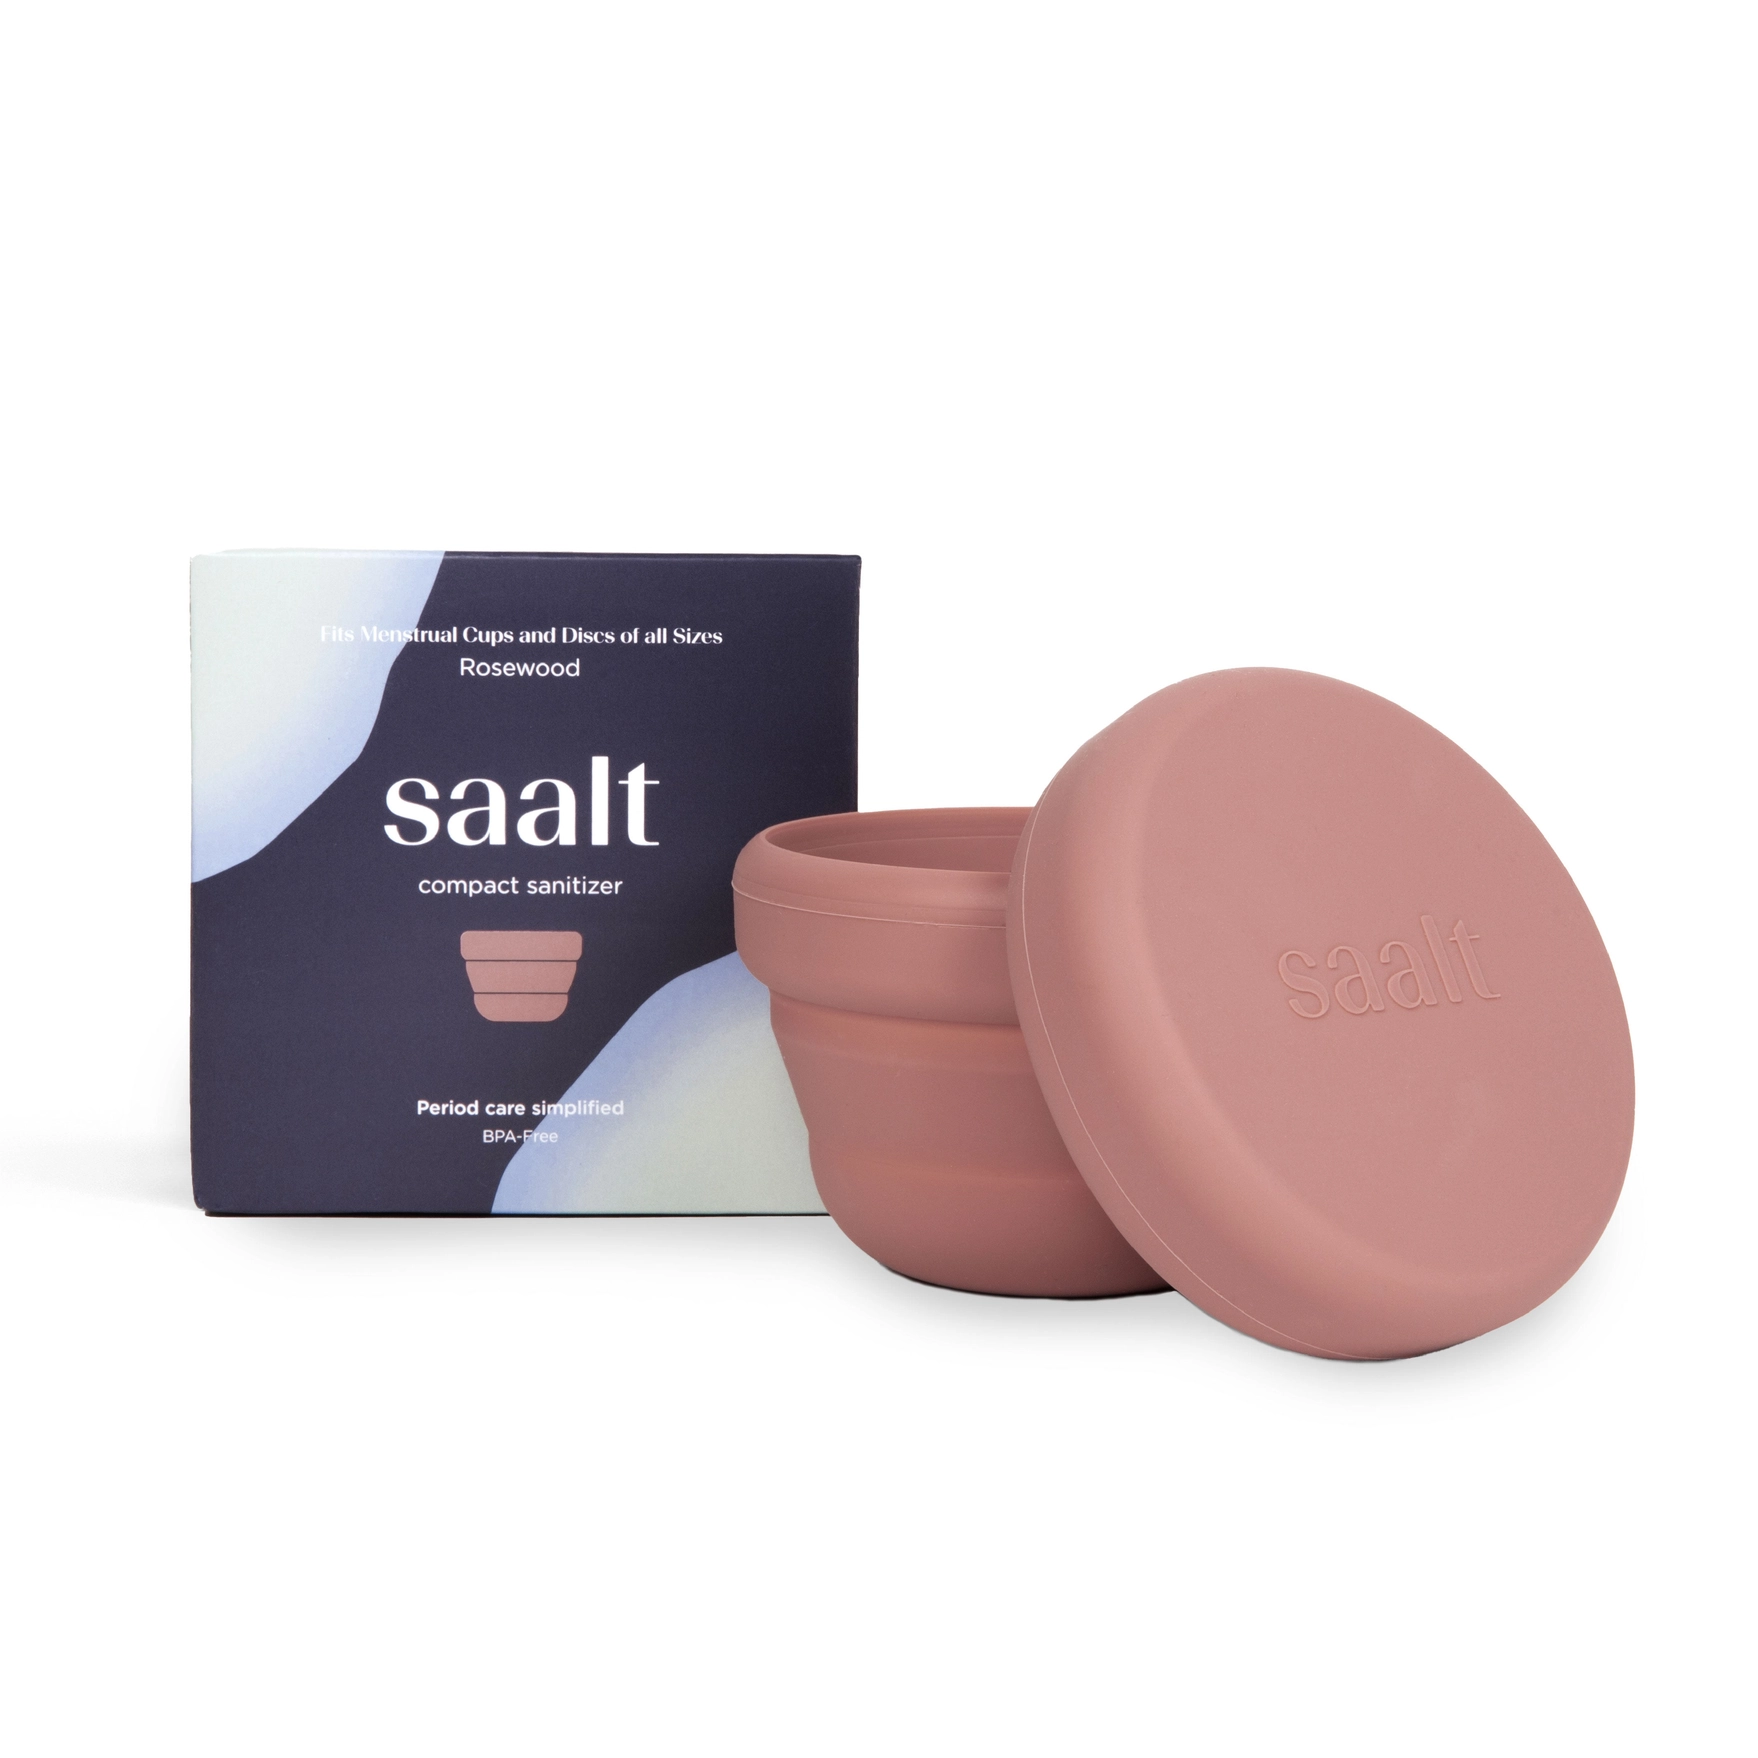 Saalt Period Care 101: Period Products - You've Got Options! 